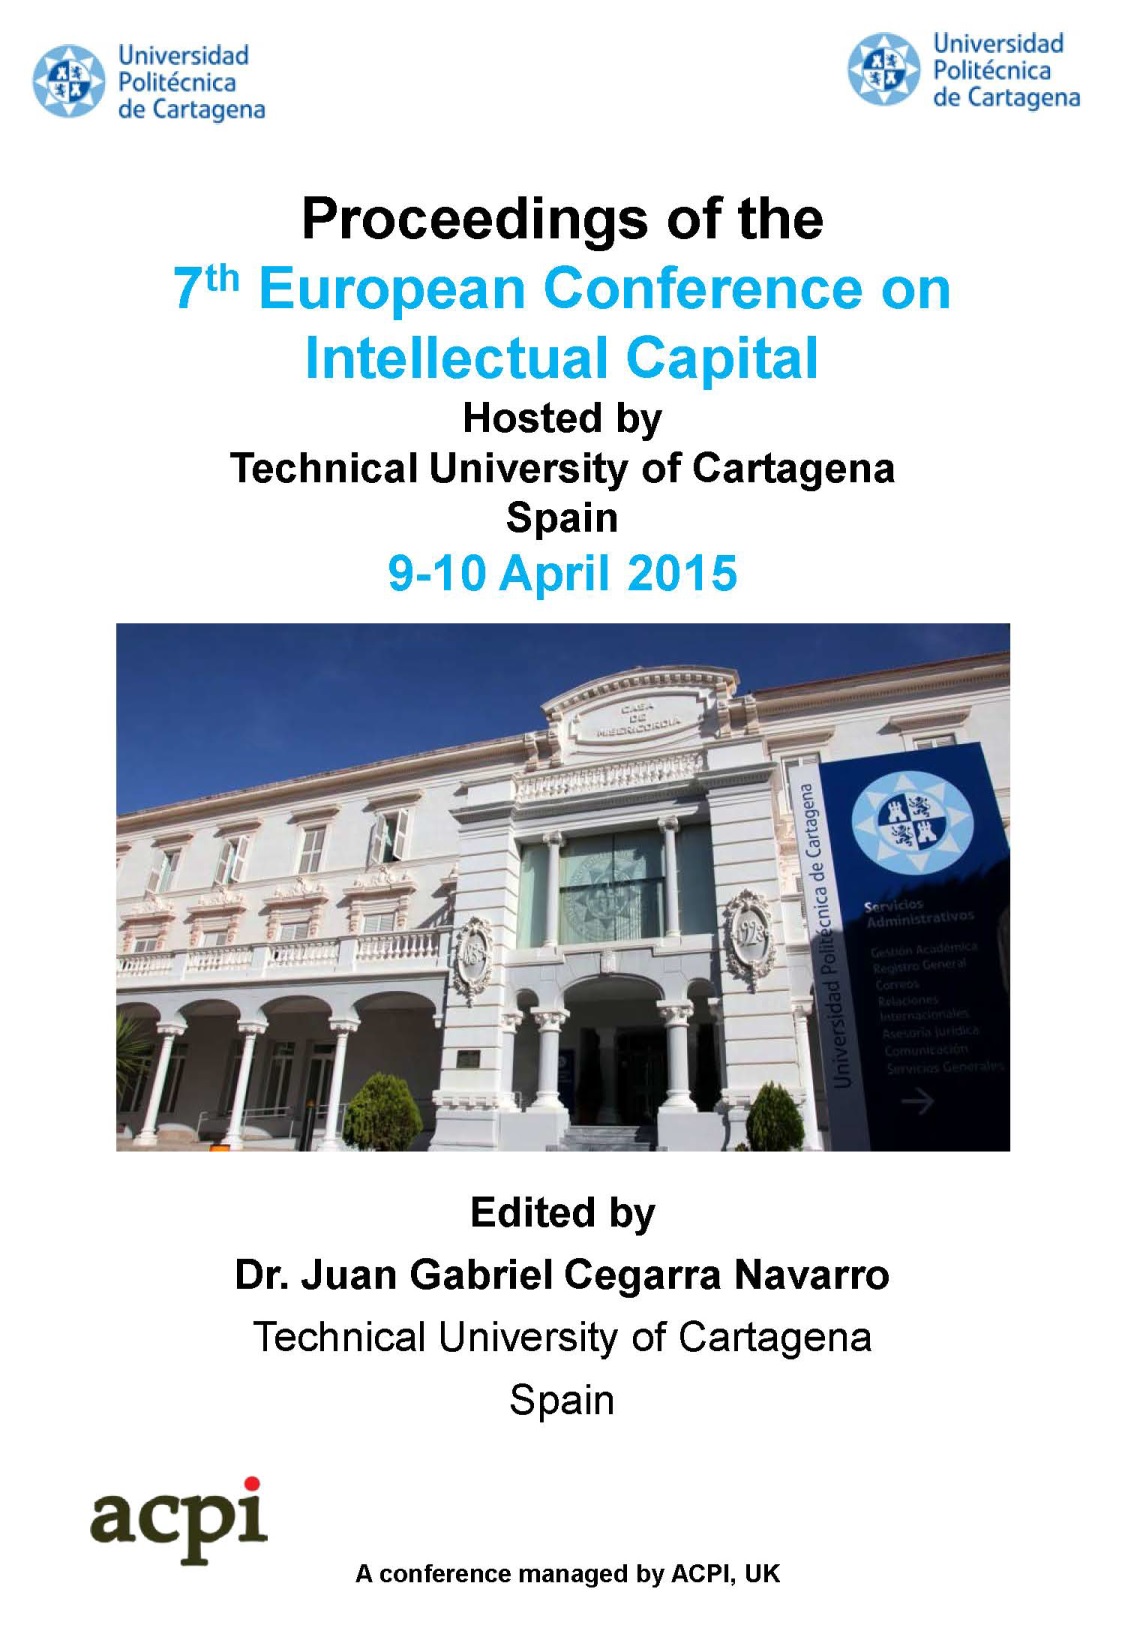 Proceedings of the 7th European Conference on Intellectual Capital ECIC 2015